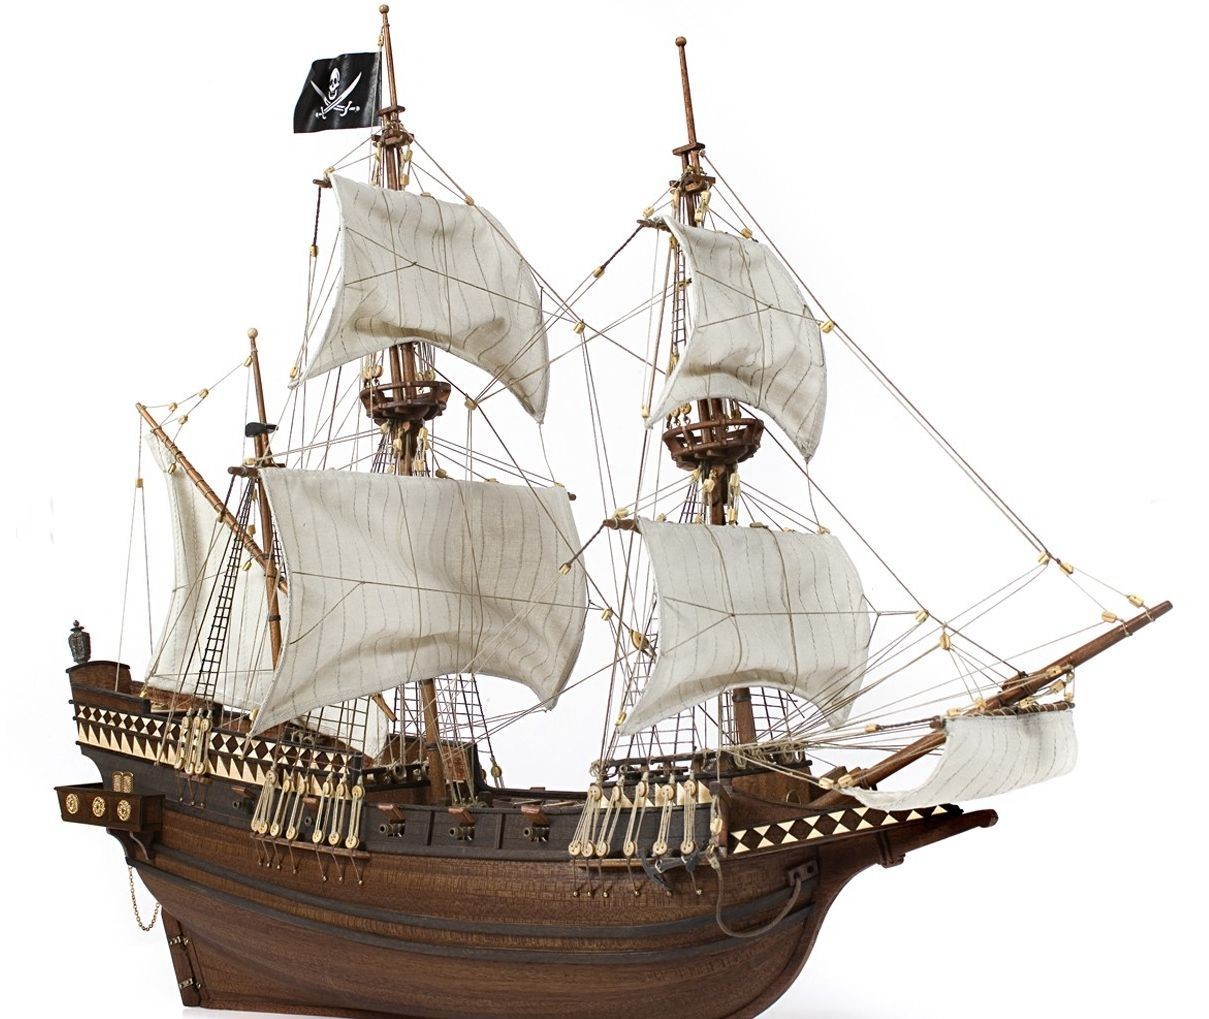 Papercraft Pirate Ship Occre Buccaneer Wooden Pirate Galleon 1 100 Scale Model Ship Kit